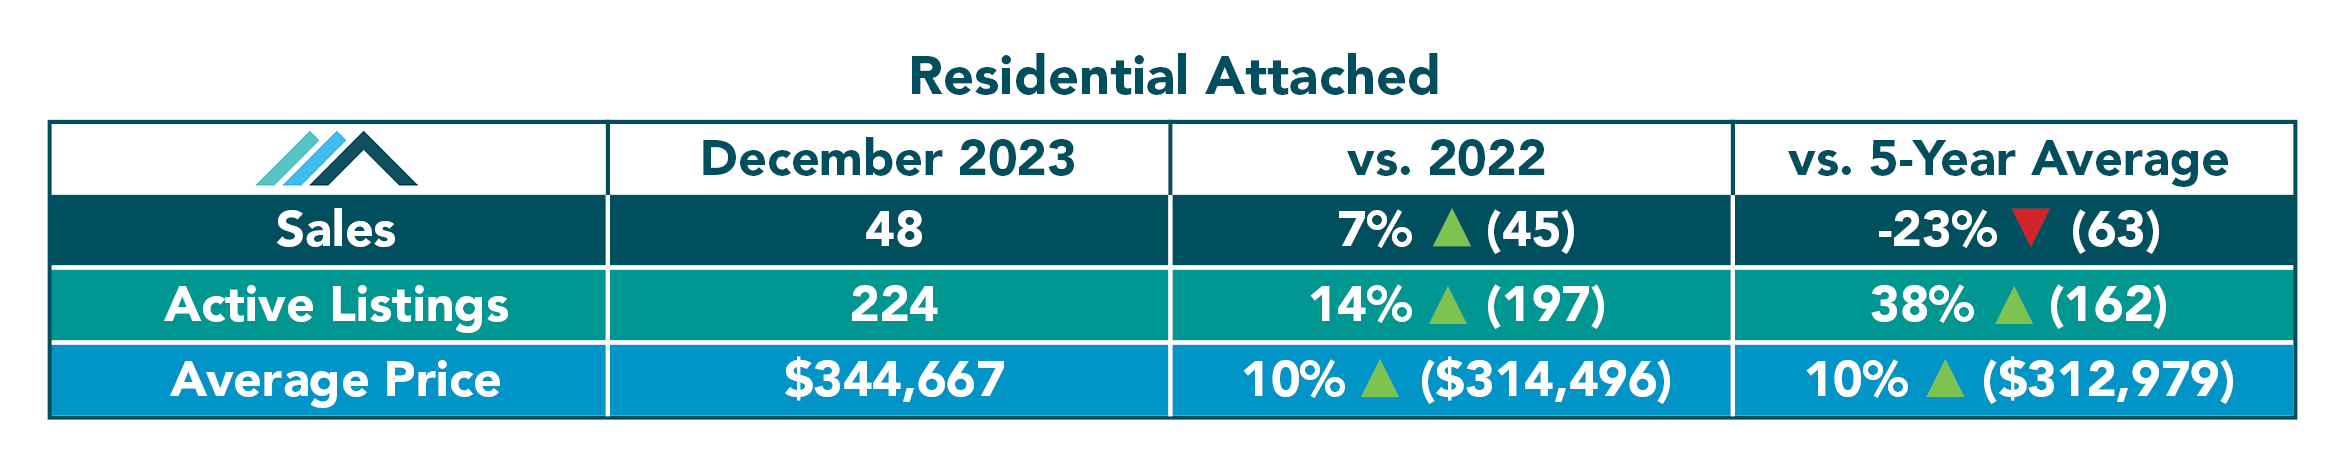 Residential Attached Tables December 2023